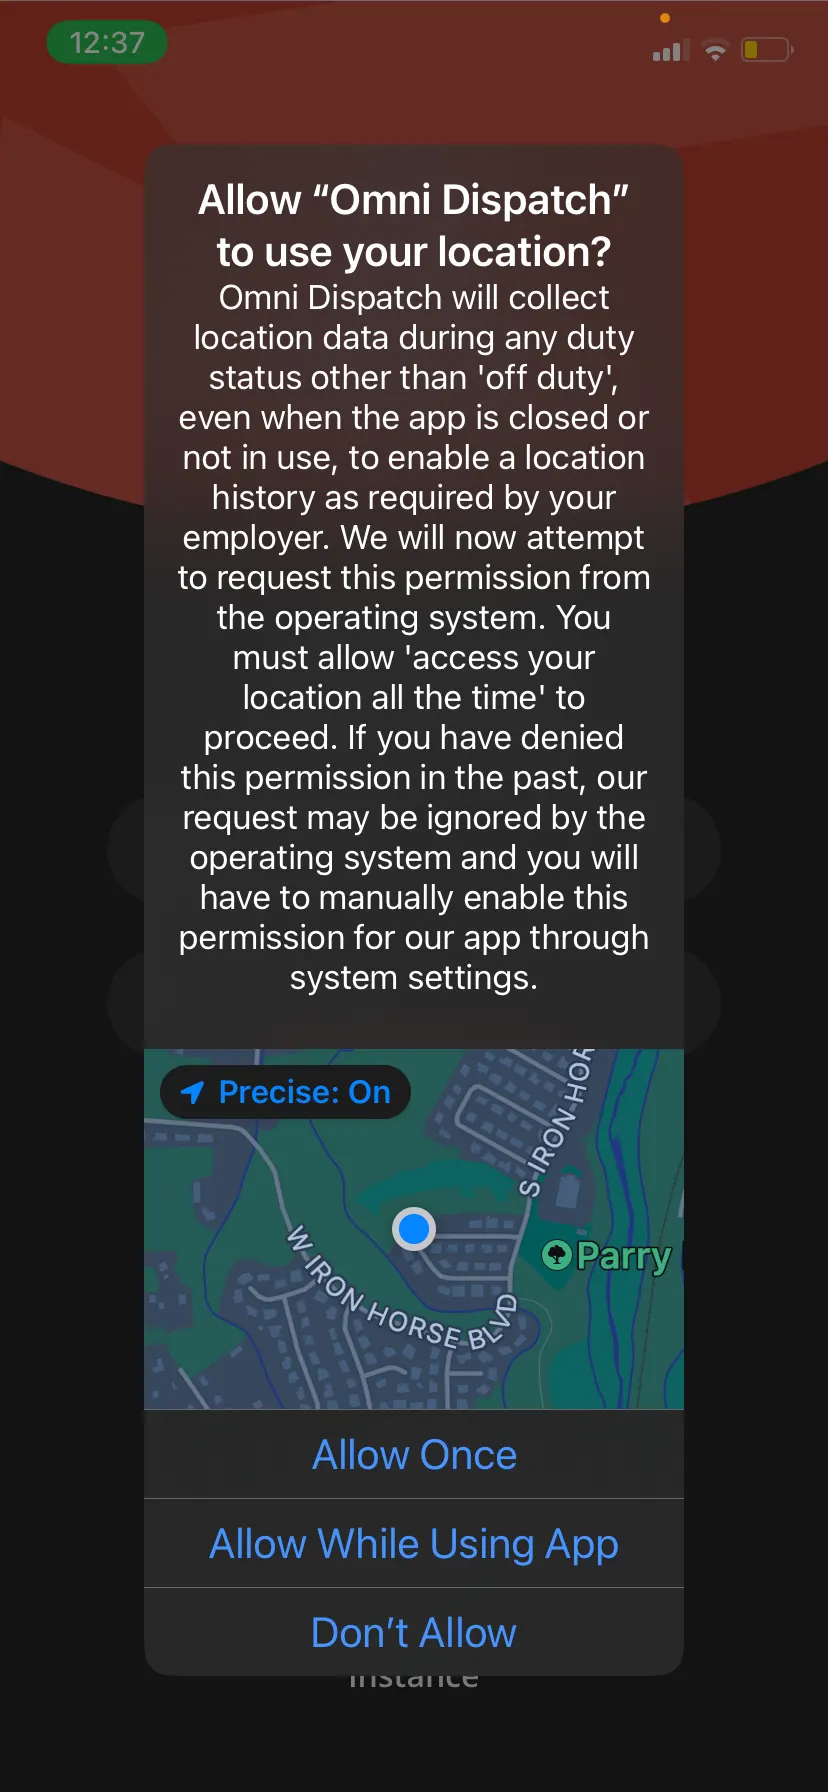 When asked to allow Omni Dispatch to use your location, select Allow While Using The App.